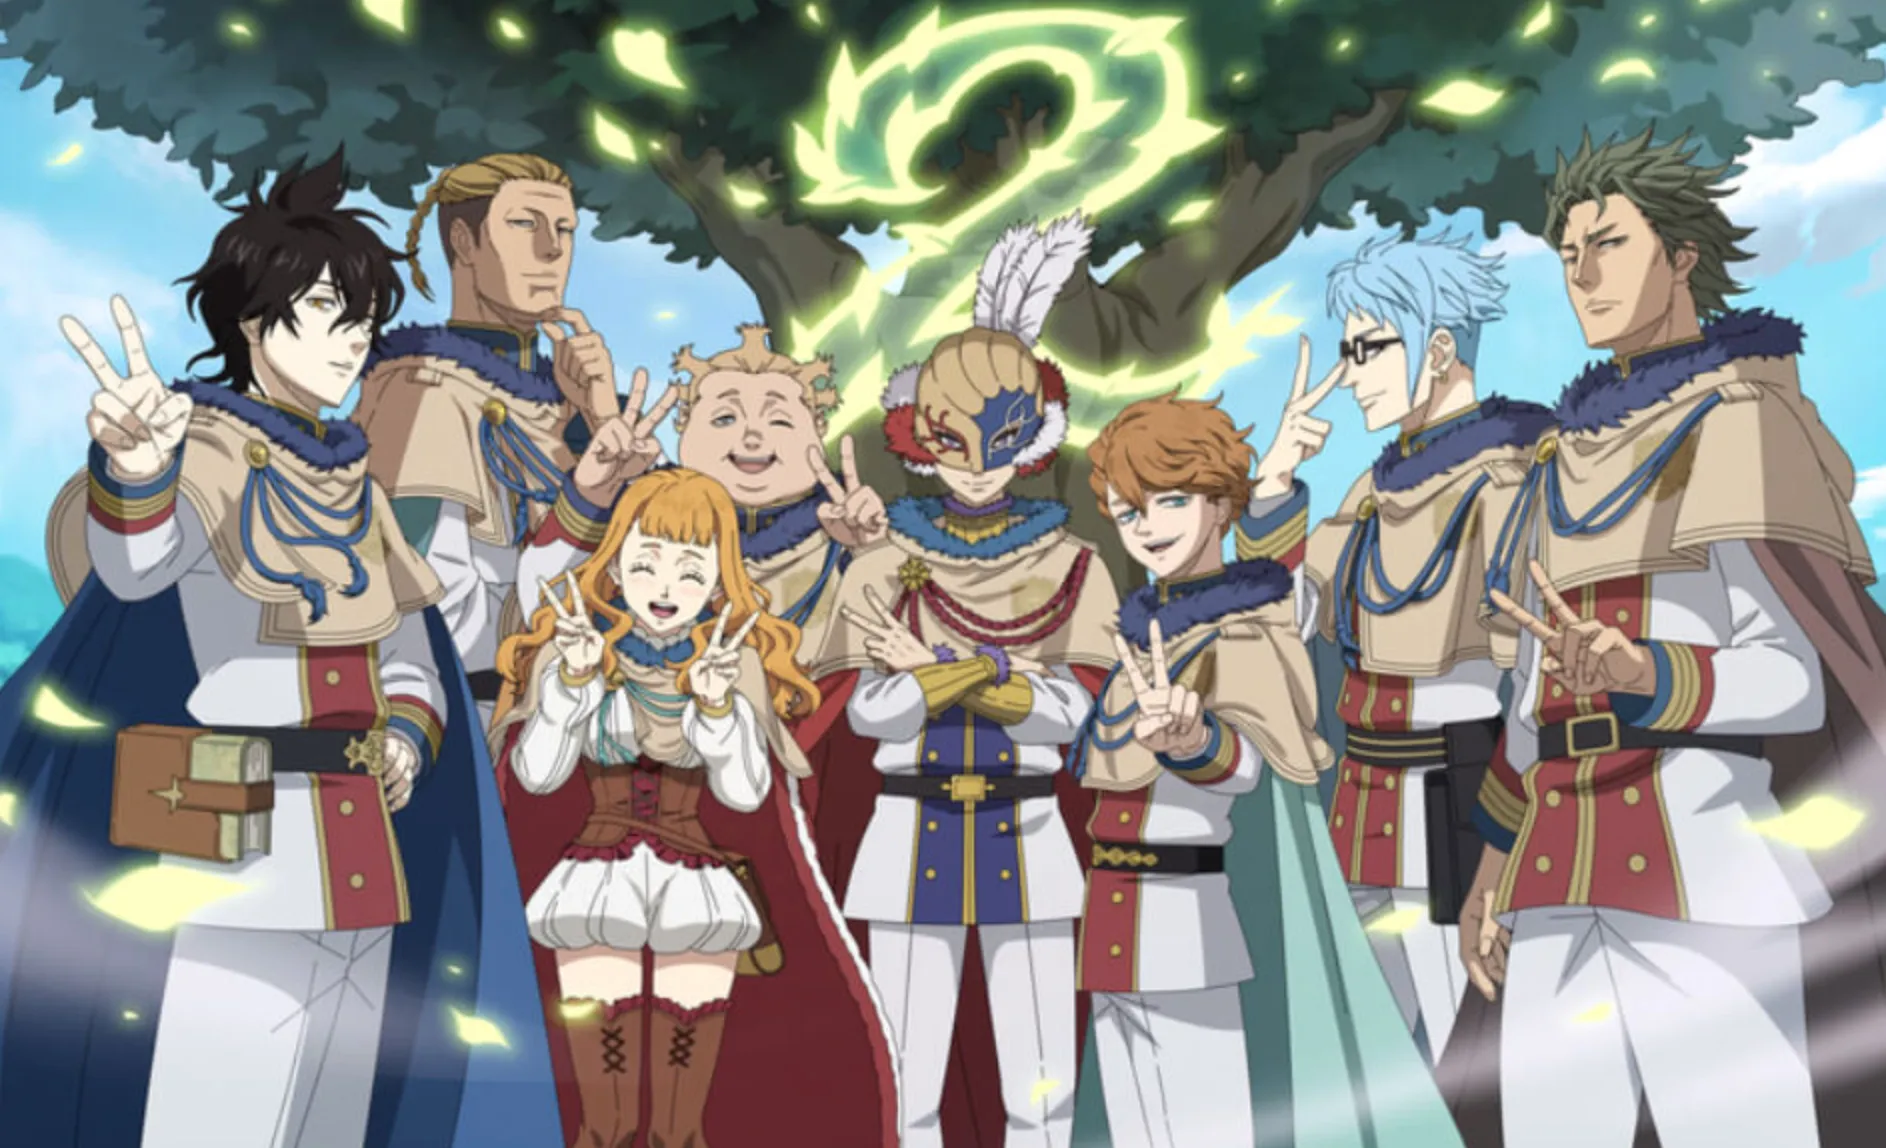 All Black Clover Openings, Ranked